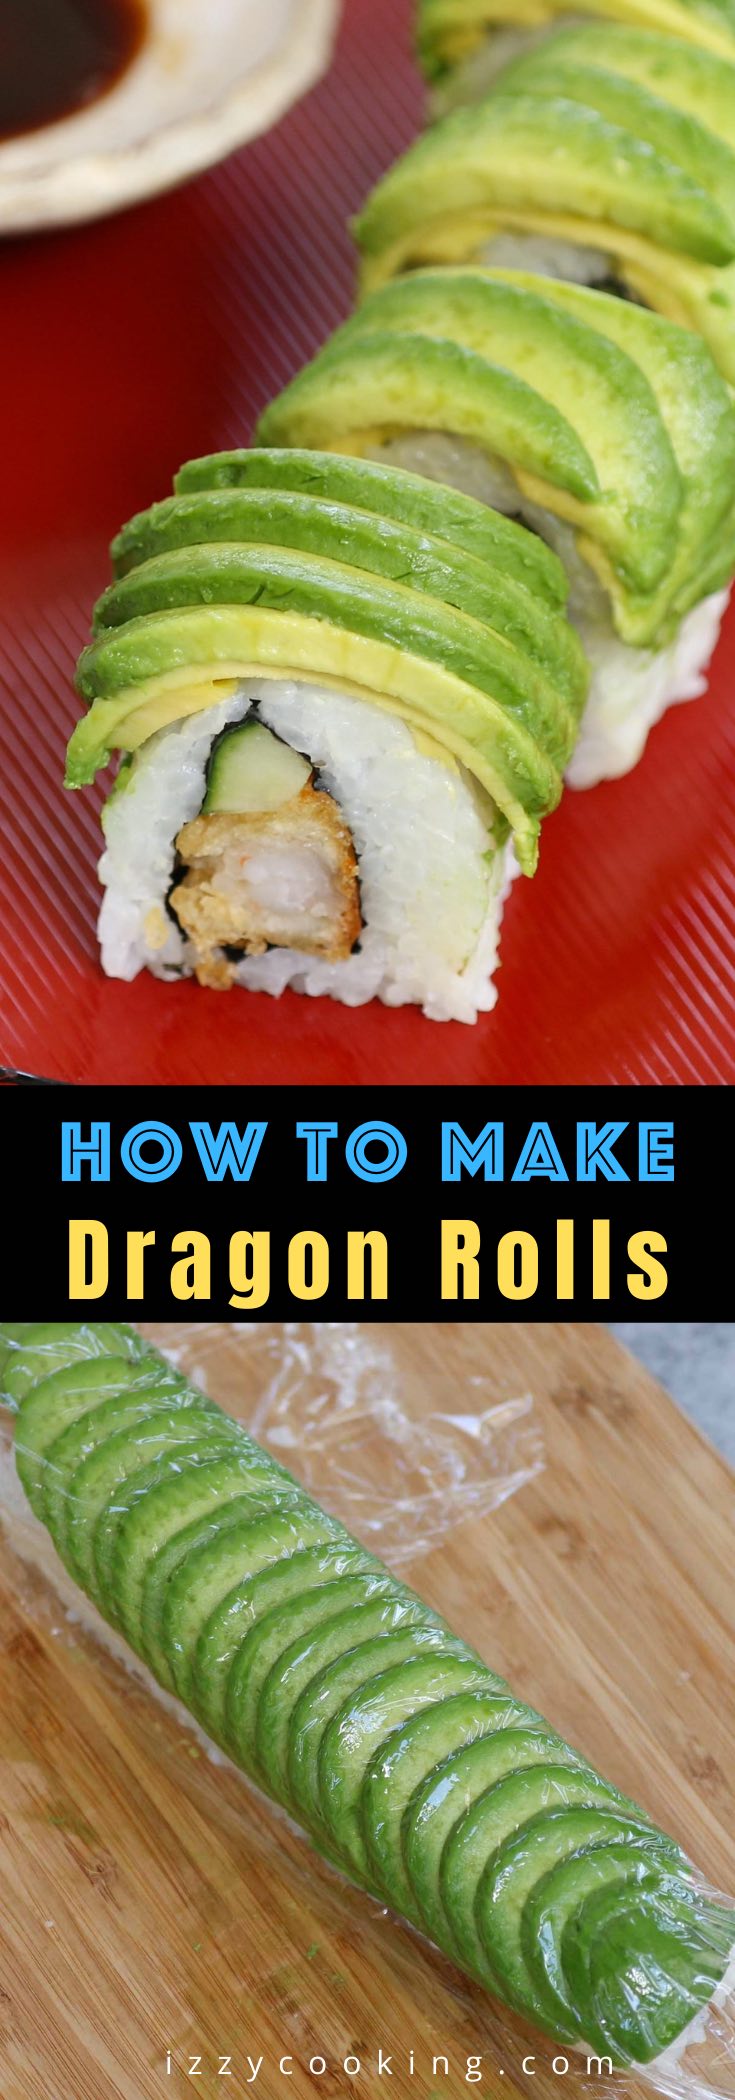 The Dragon Roll is one of the all-time best sushi dishes at Japanese restaurants. Filled with shrimp tempura and cucumber, dragon roll sushi has a delicious avocado topping, resembling the scales of a dragon. We’ll share all the tips and tricks so that you can easily make them at home! 